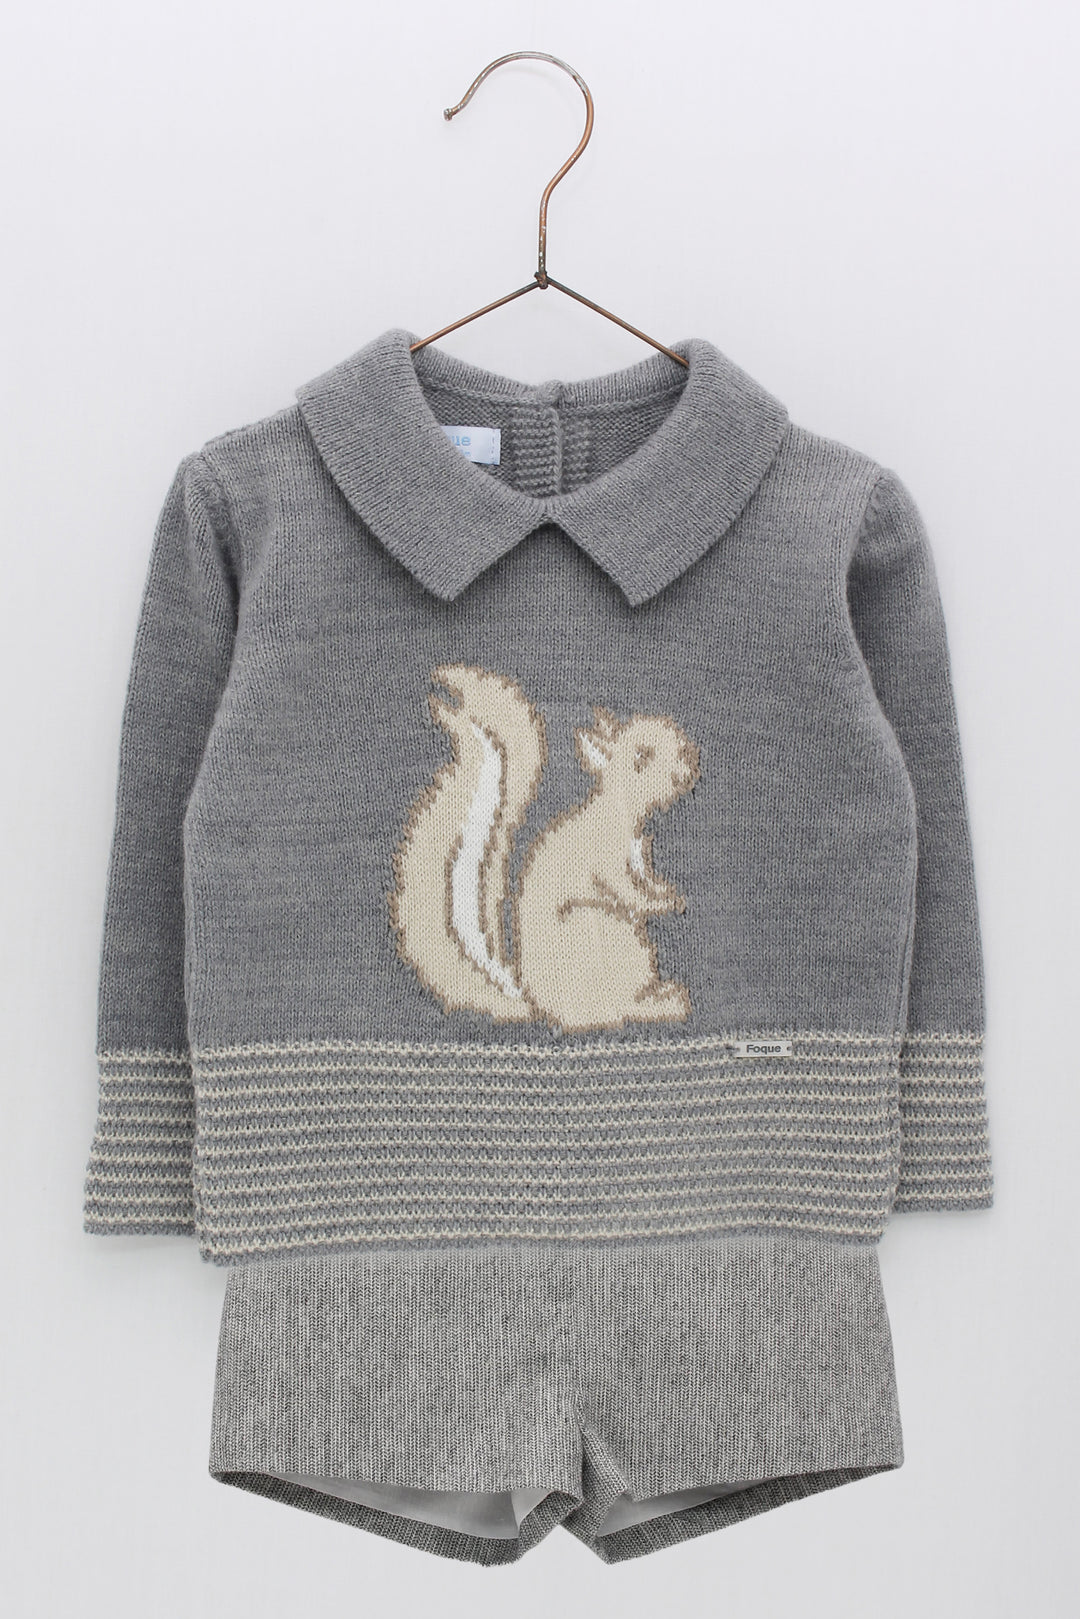 Foque PREORDER "Vincent" Grey Knit Squirrel Top & Shorts | Millie and John